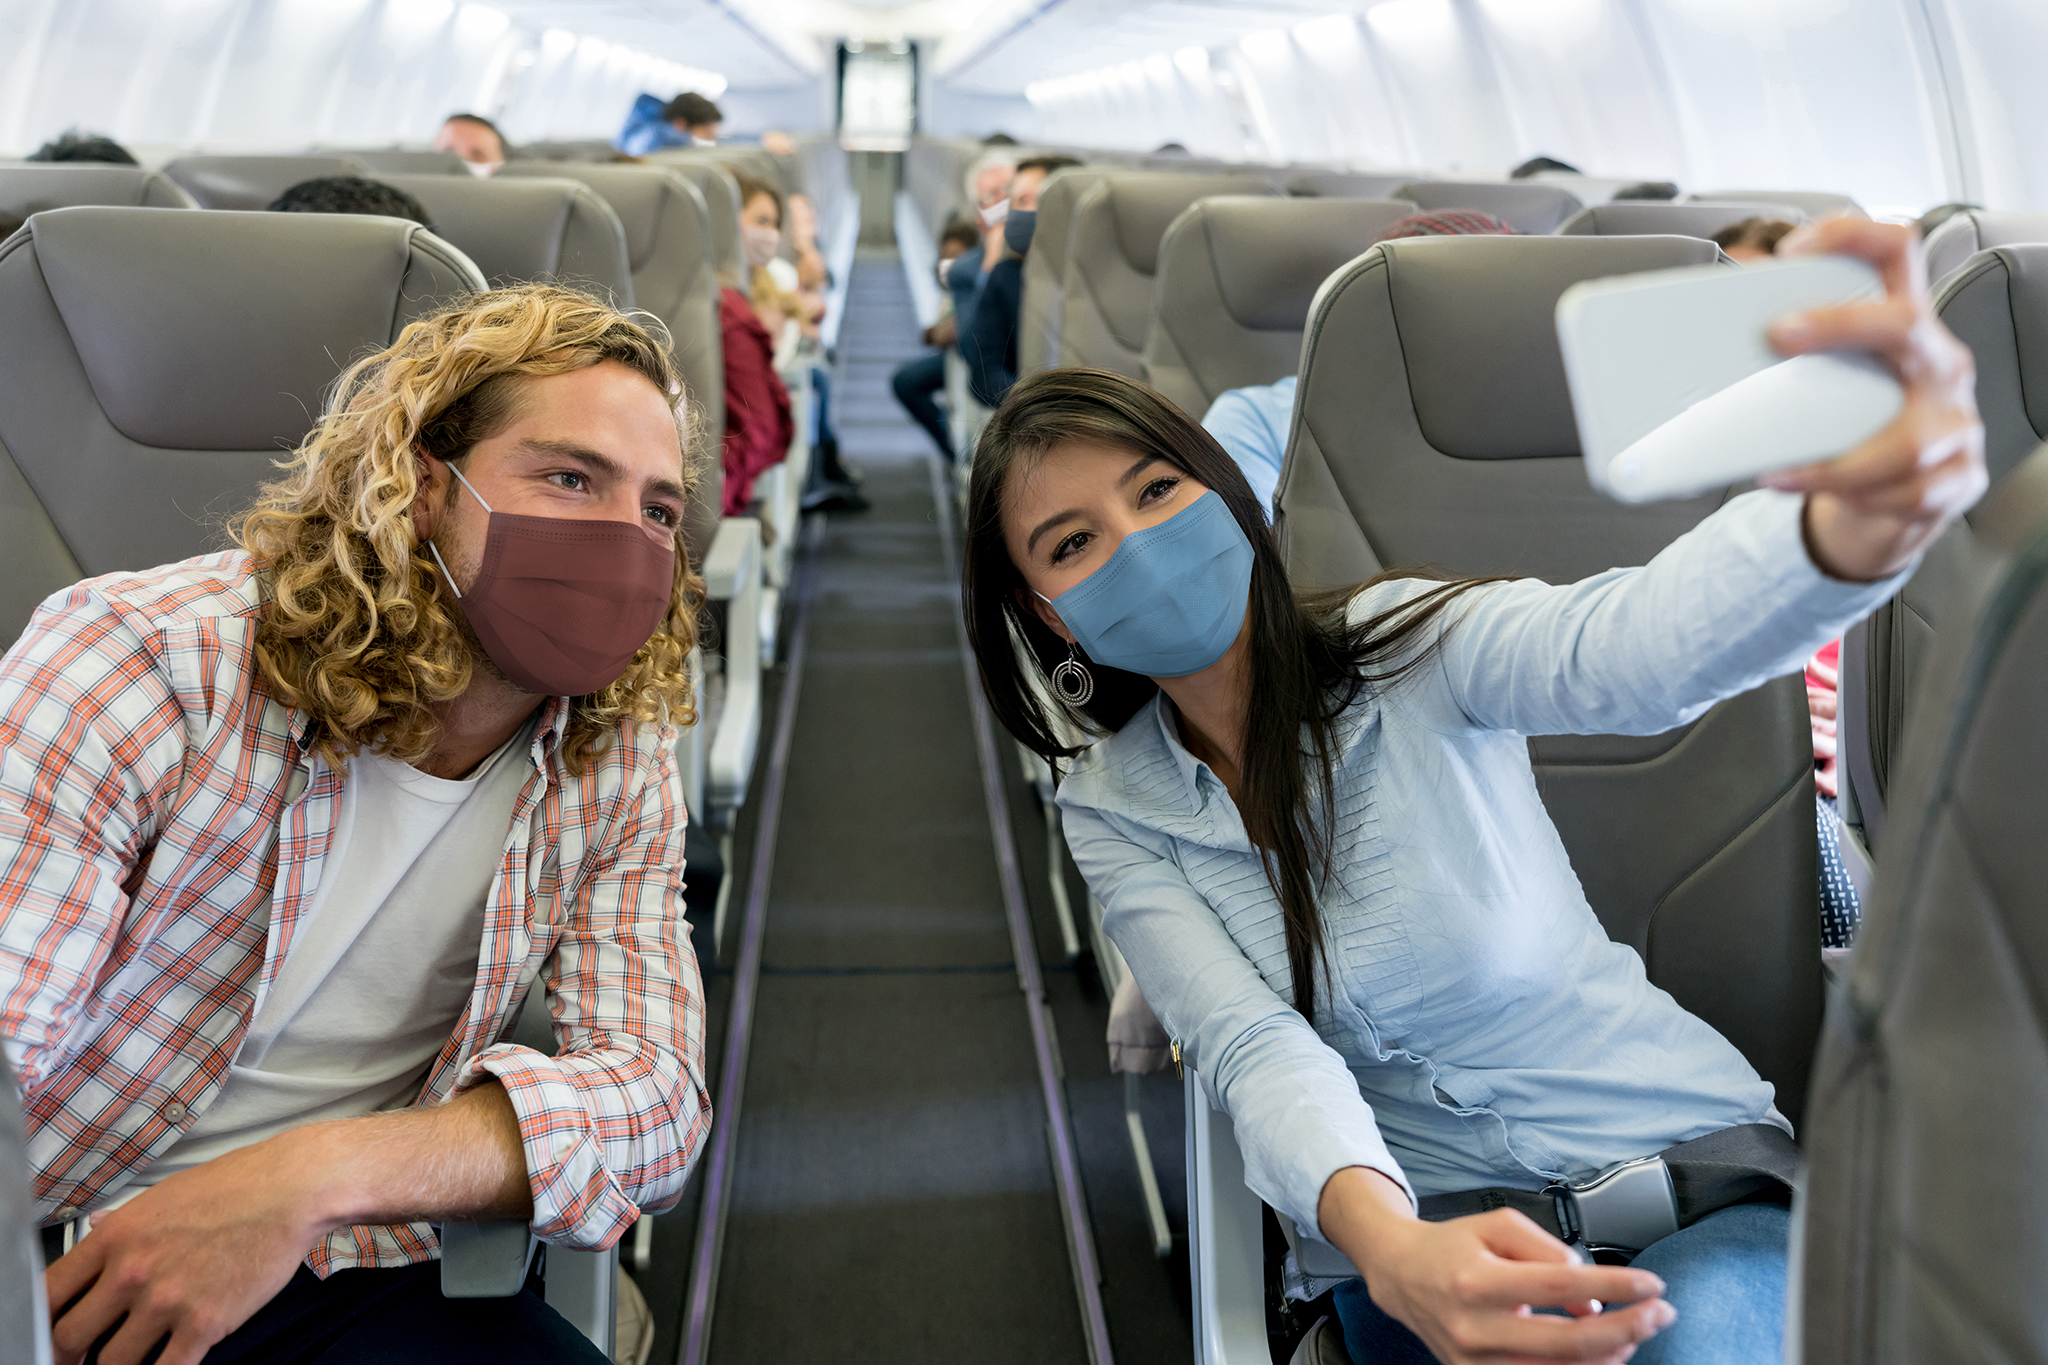 The best mask to wear on an airplane